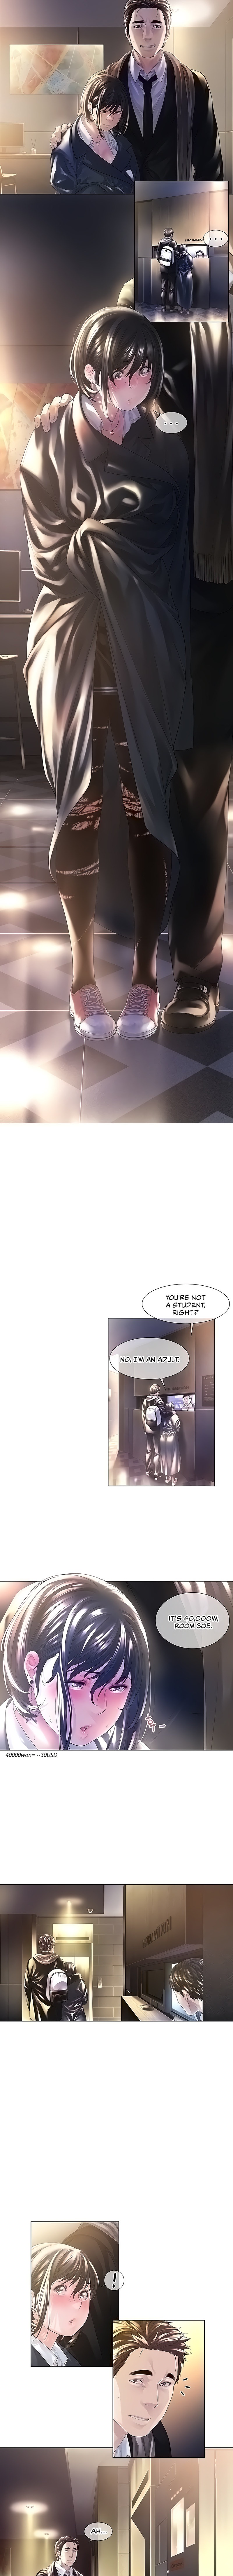 Winter short story: Can I like you Mister? - Chapter 3 Page 2